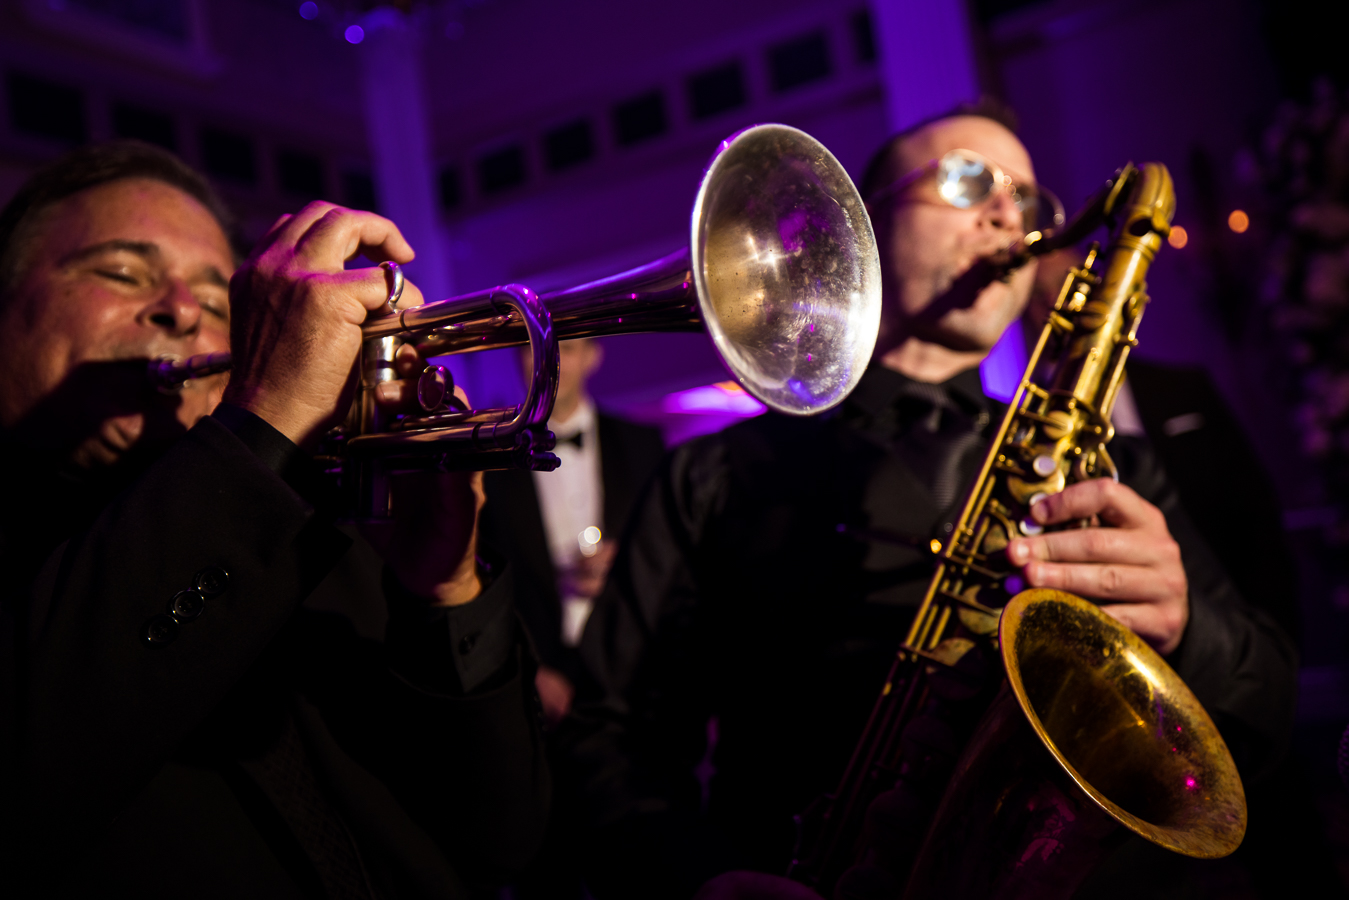 creative nj wedding photographer, lisa rhinehart, captures this close up creative image of the craig scott band as they play their instruments during this black and gold wedding reception at the palace at somerset park 